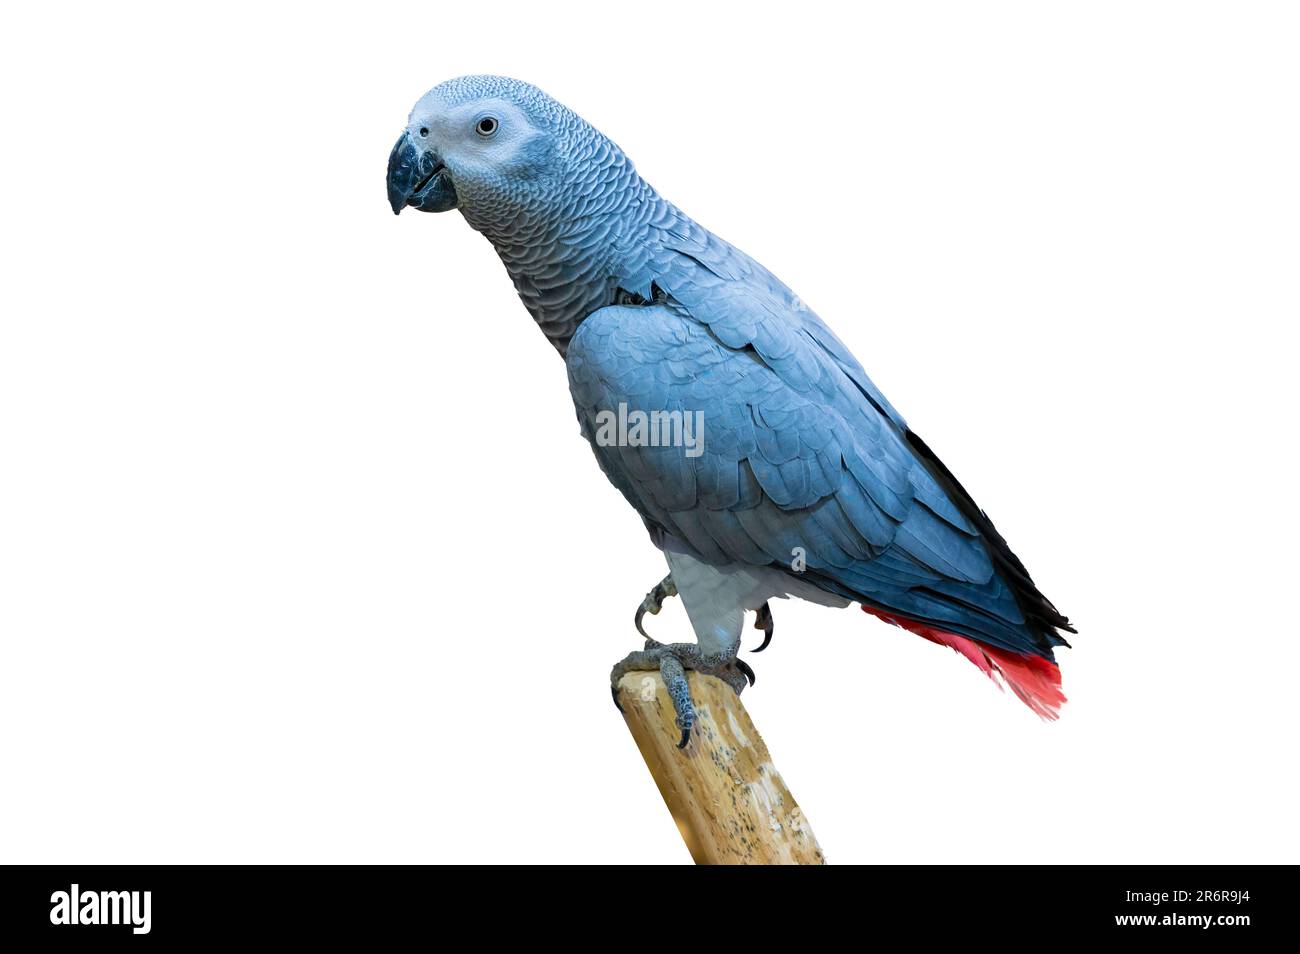 Grey parrot isolate parakeet perching on branch on white background isolate Stock Photo